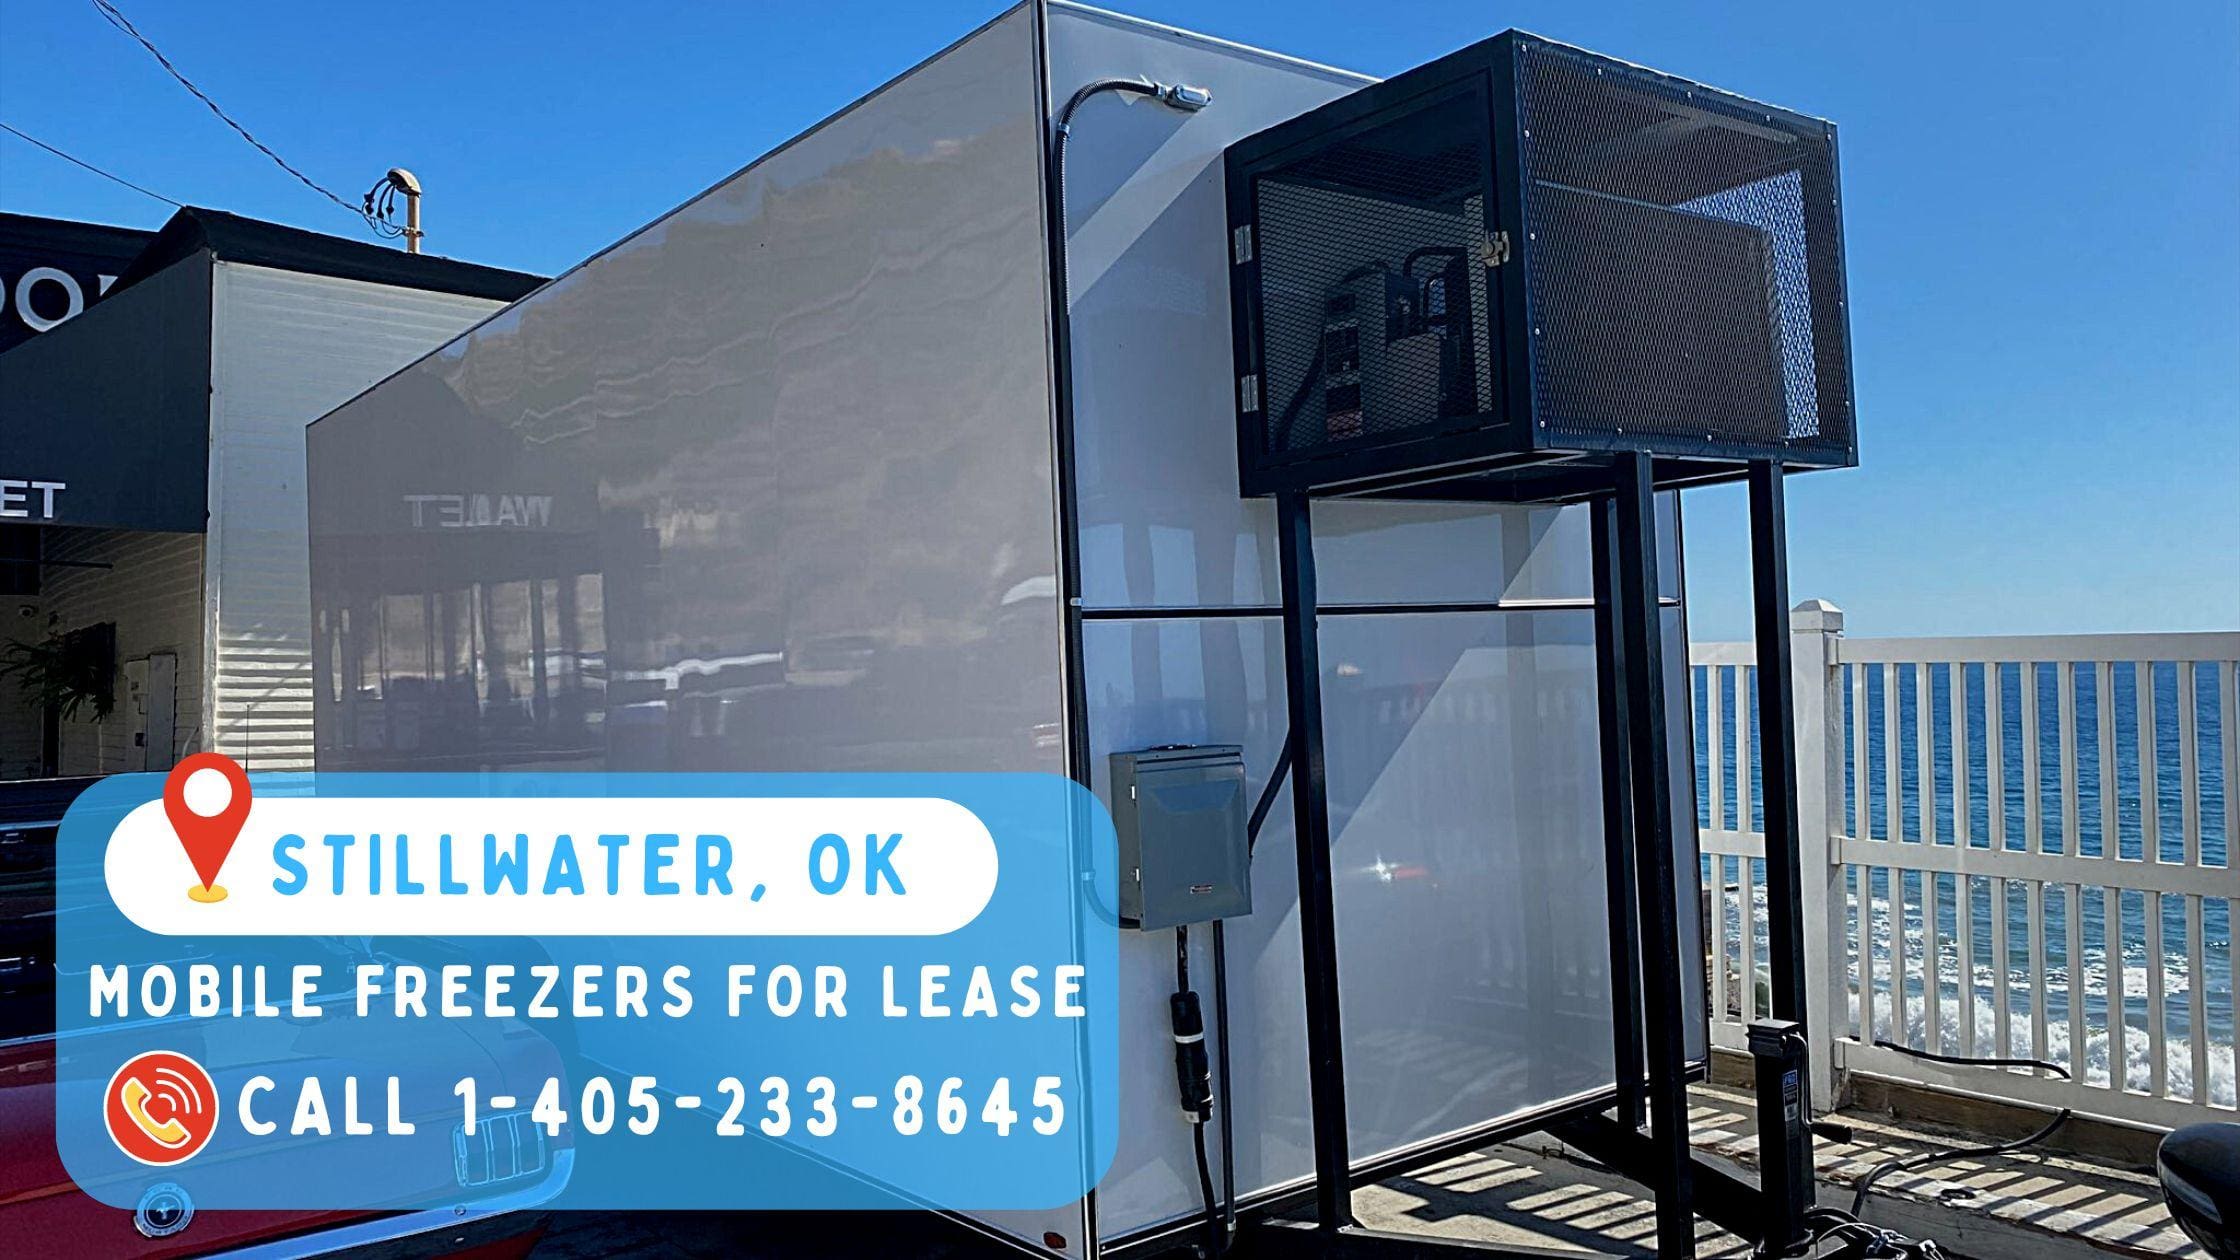 Mobile Freezers for Lease in Stillwater, OK